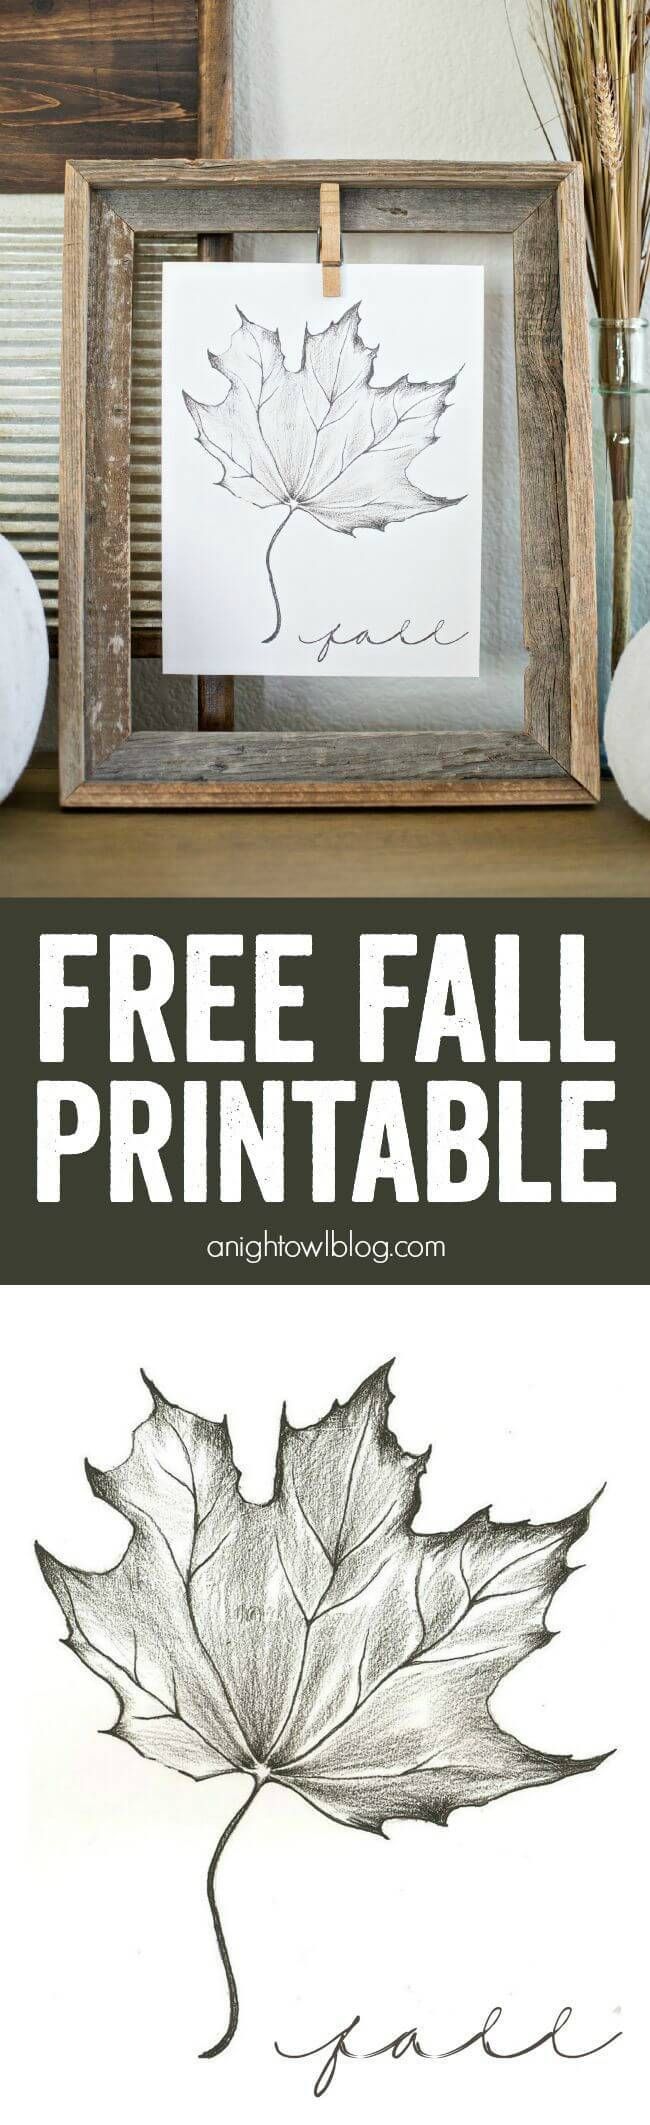 5. Fall printable -   HOME DECORATIONS WITH FALL LEAVES